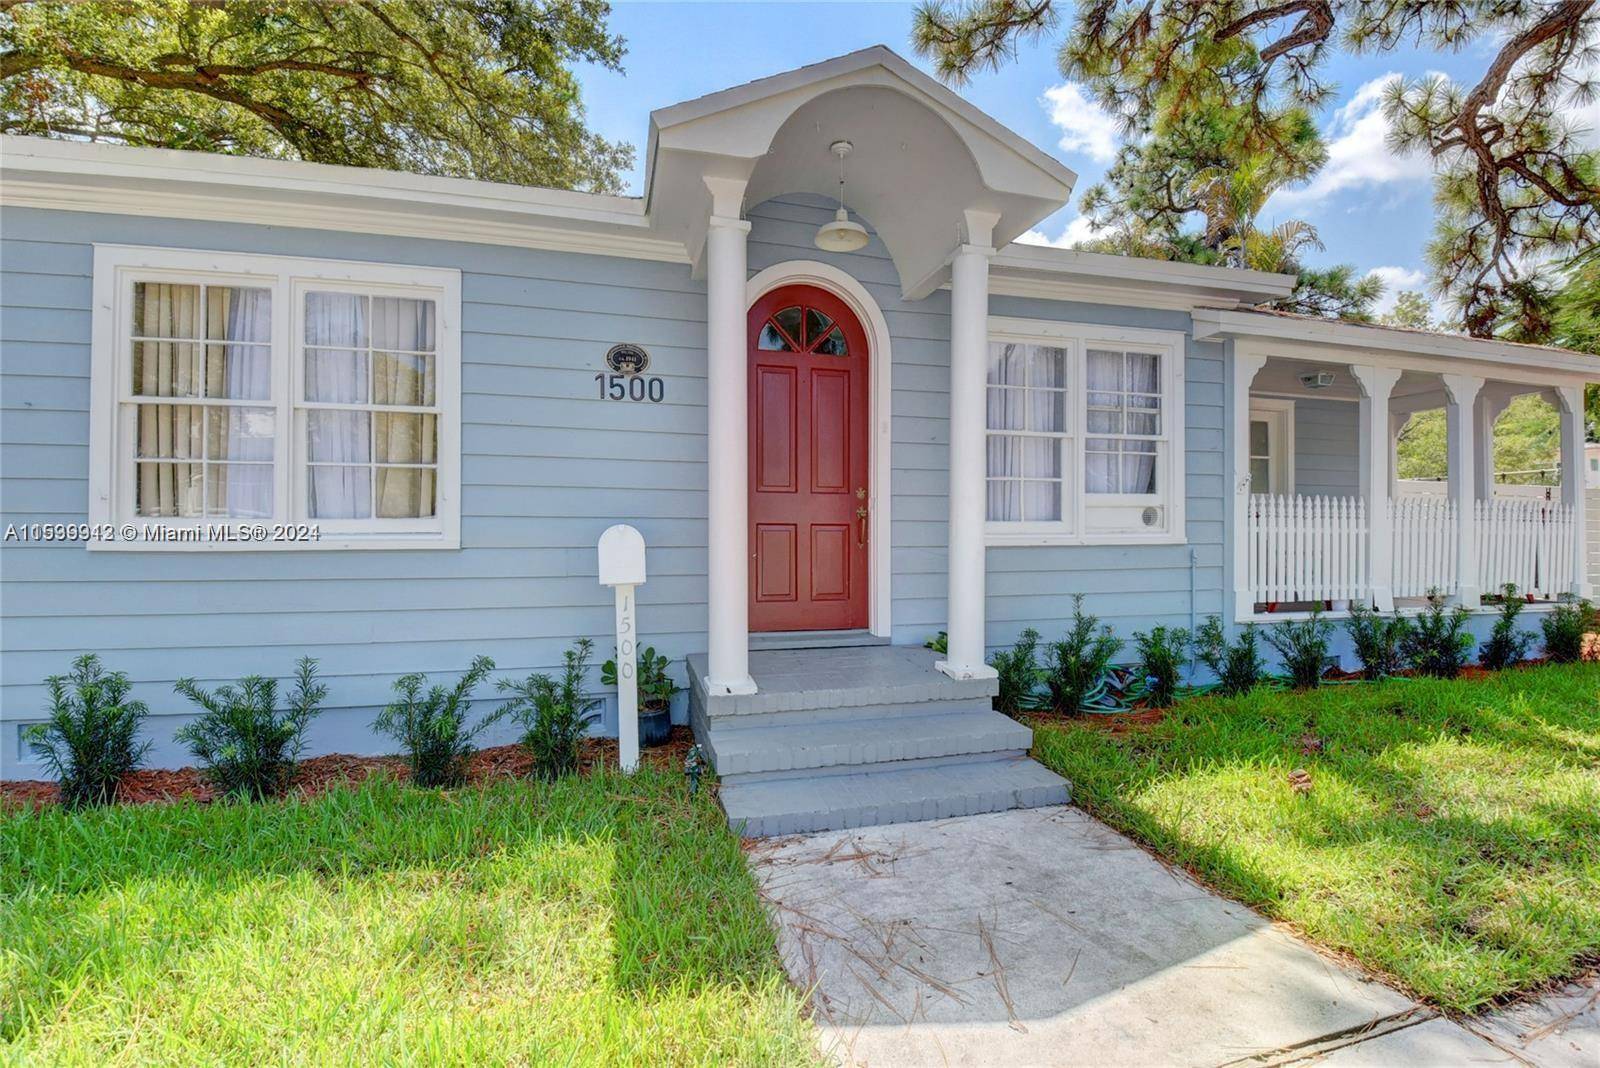 A Beautiful Historically Designated Key West Style 1941 Bungalow has been maintained in pristine condition.